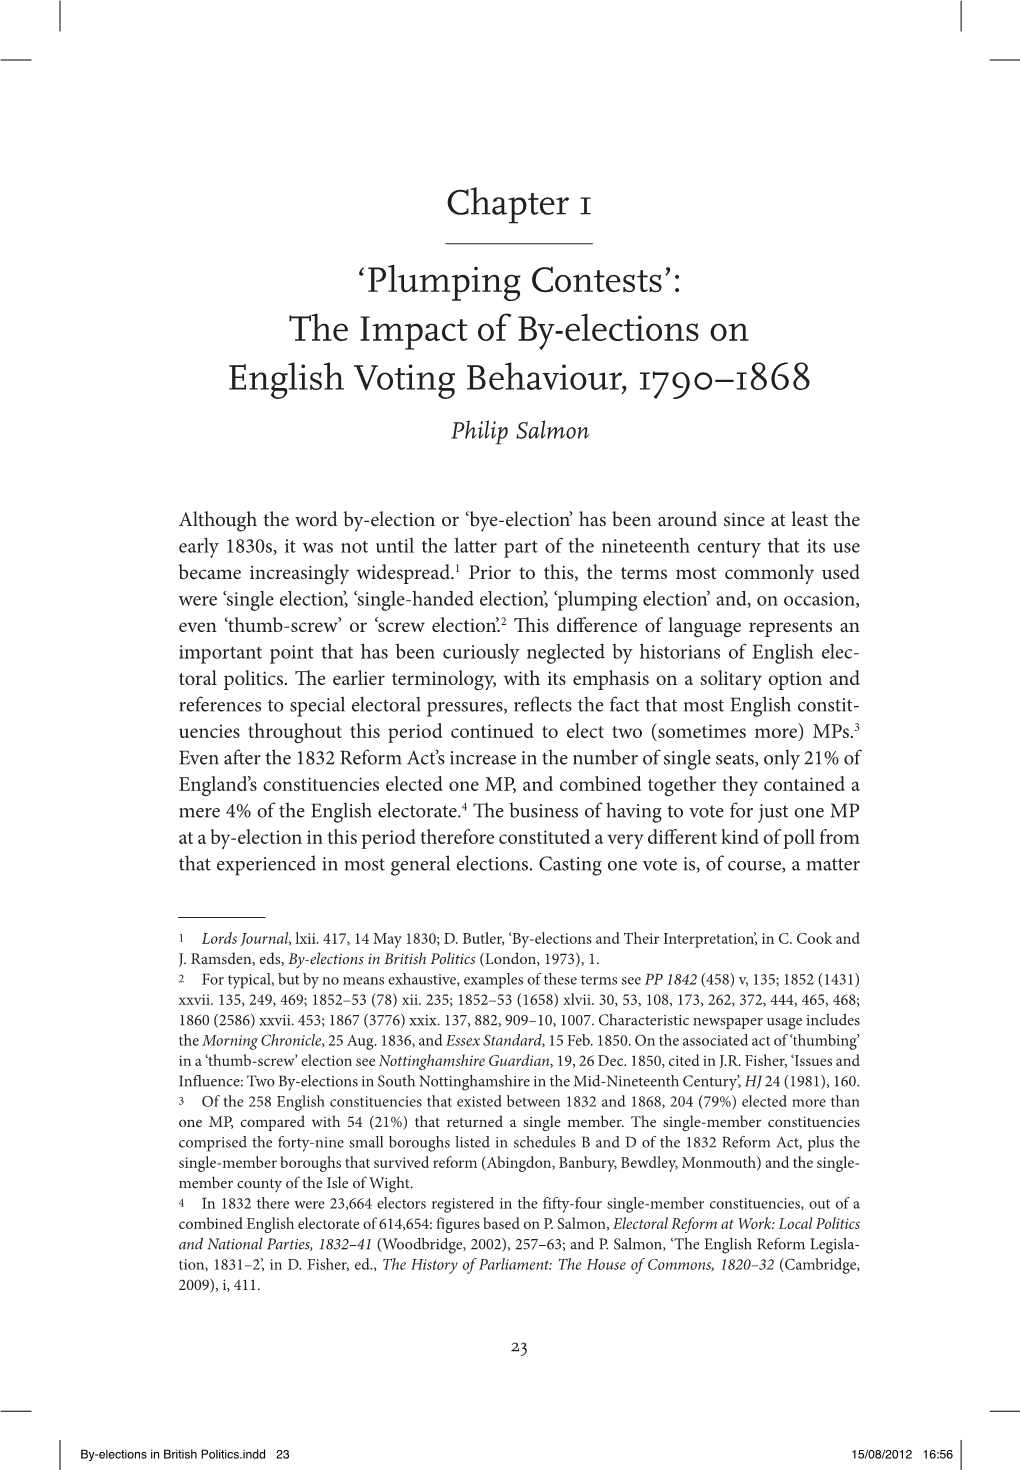 The Impact of By-Elections on English Voting Behaviour, 1790–1868 Philip Salmon